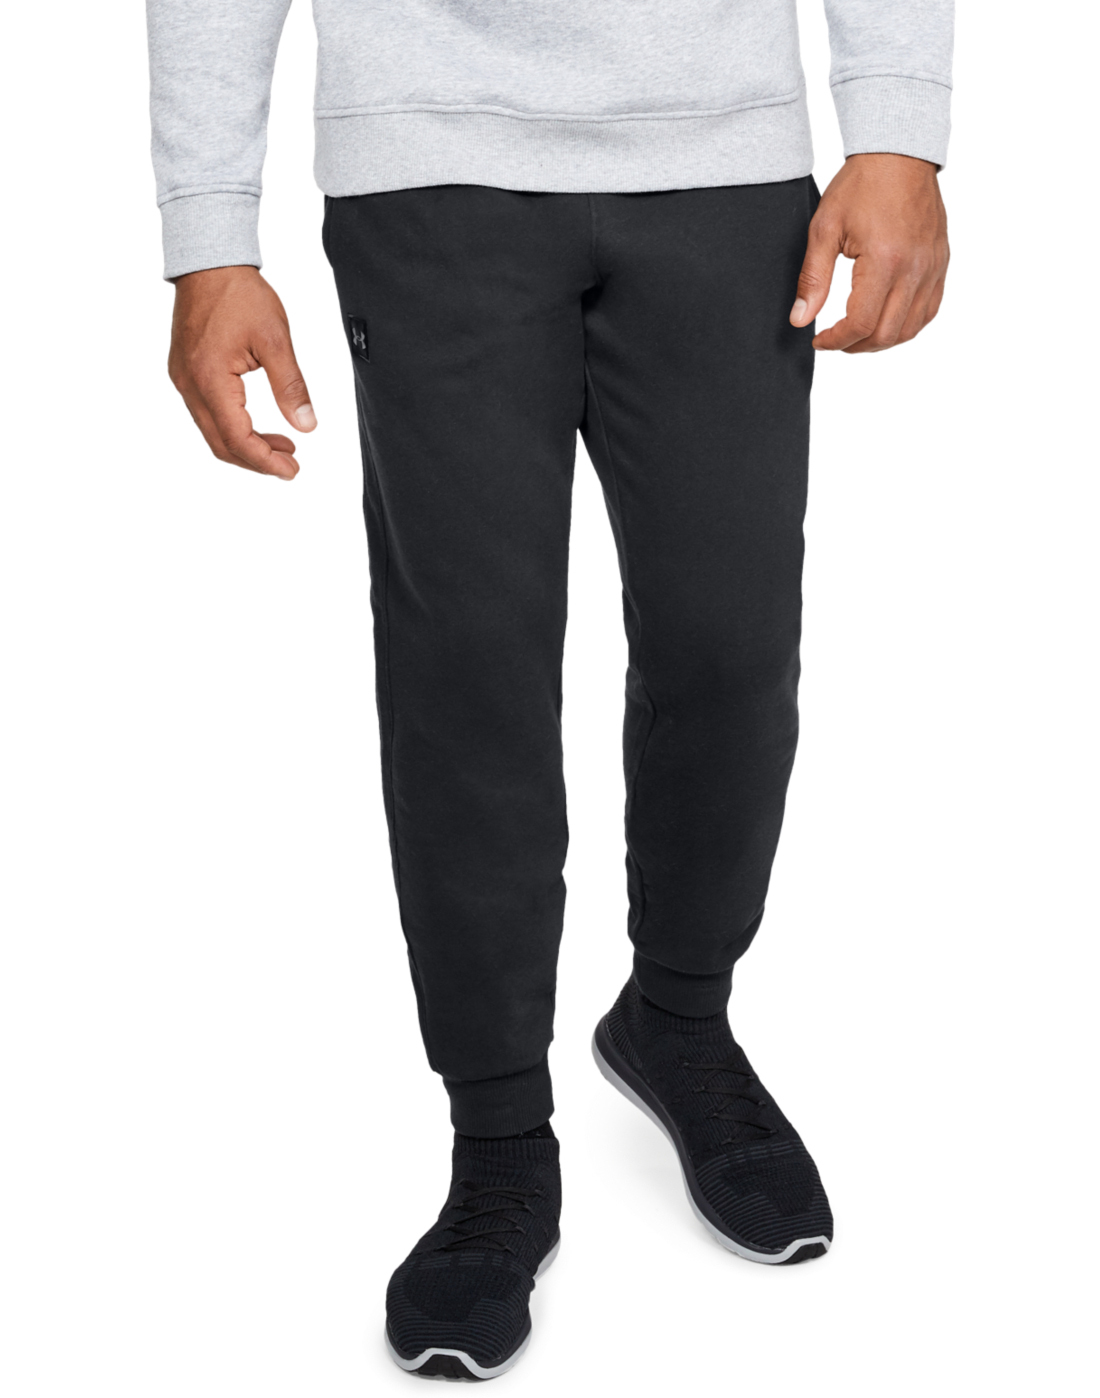 Under Armour Mens Rival Fleece Jogger Pants - Black | Life Style Sports IE